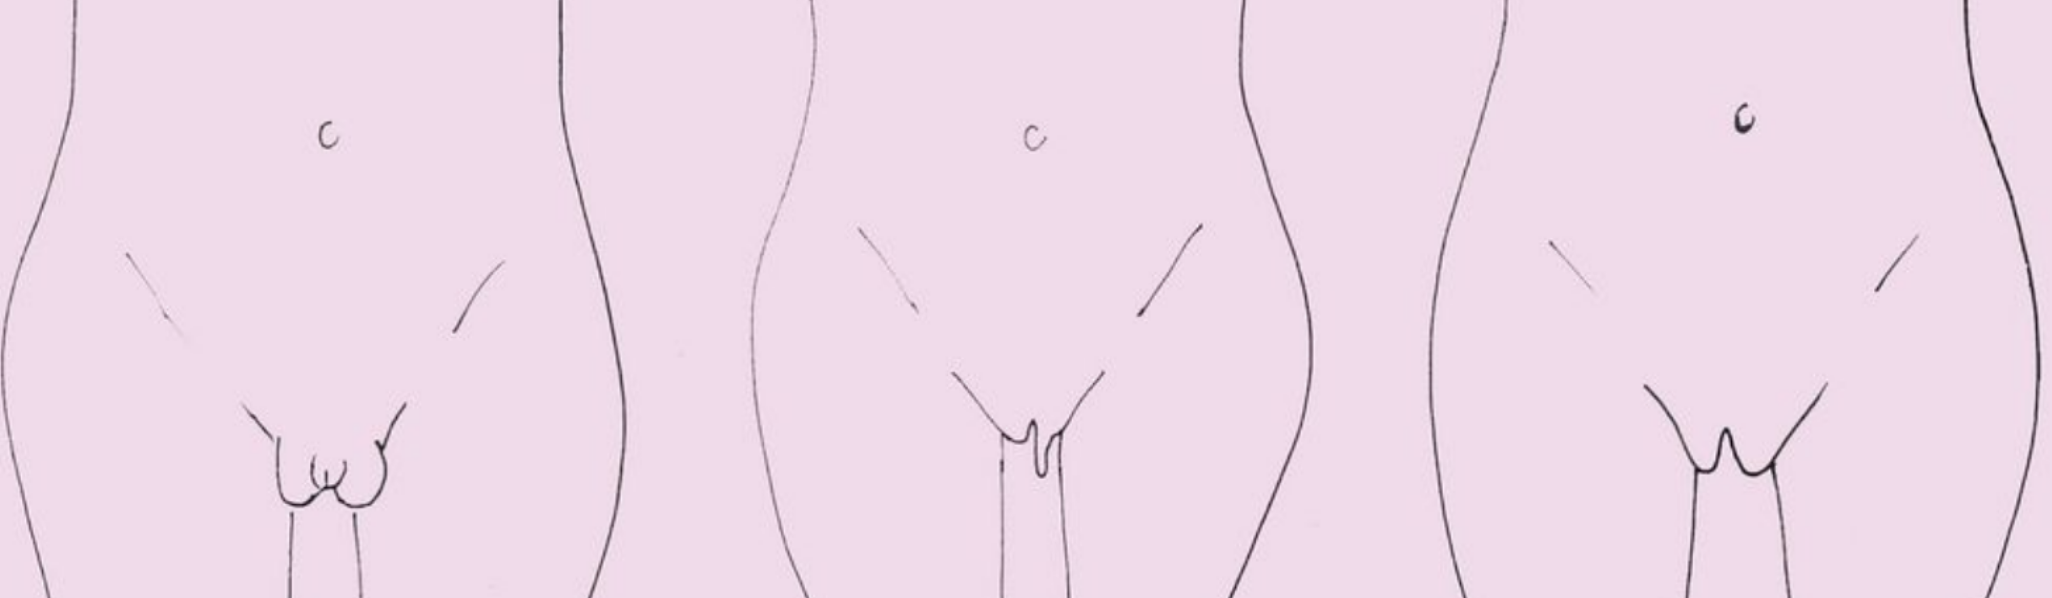 For more images and discussion check out Cosmopolitans article “These are the 7 different types of labia”